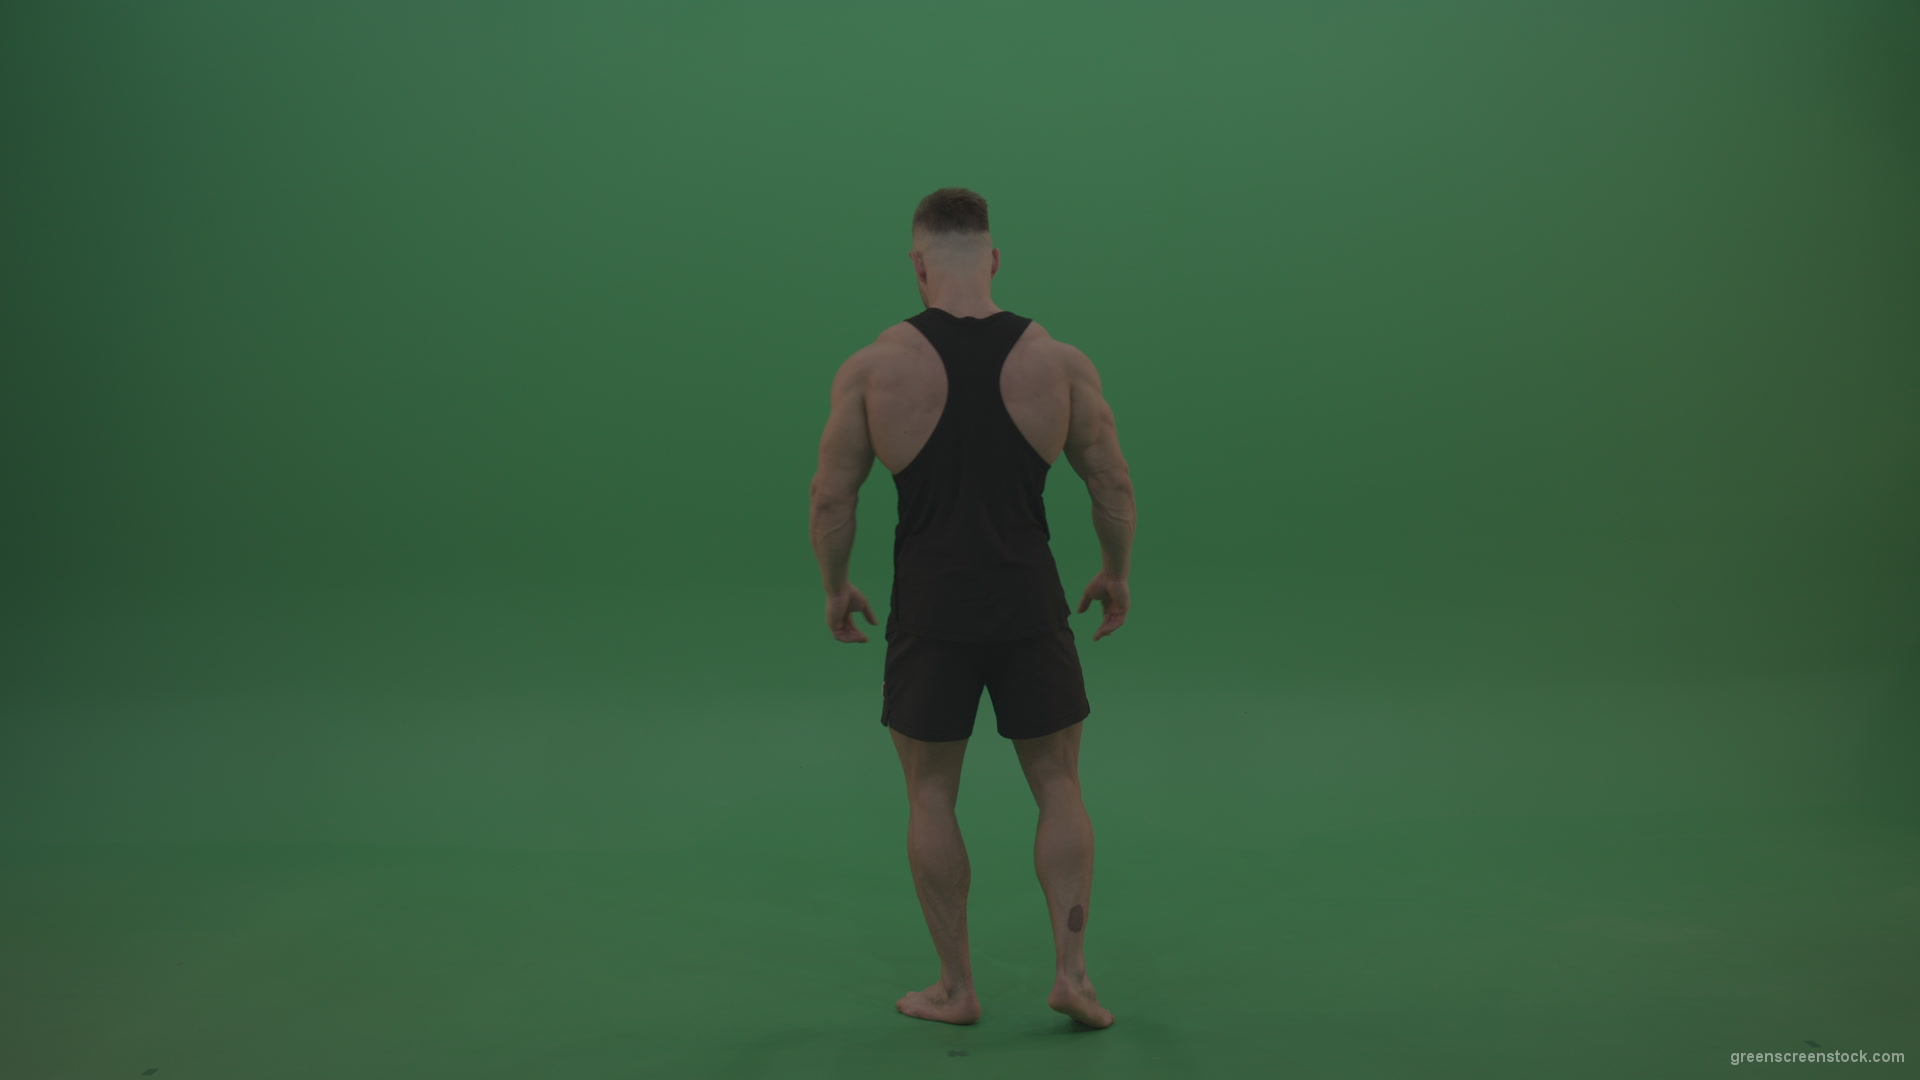 Young_Workout_Bodybuilder_Showing_Great_Double_Rear_Biceps_Technique_Green_Screen_Wall_Background_001 Green Screen Stock